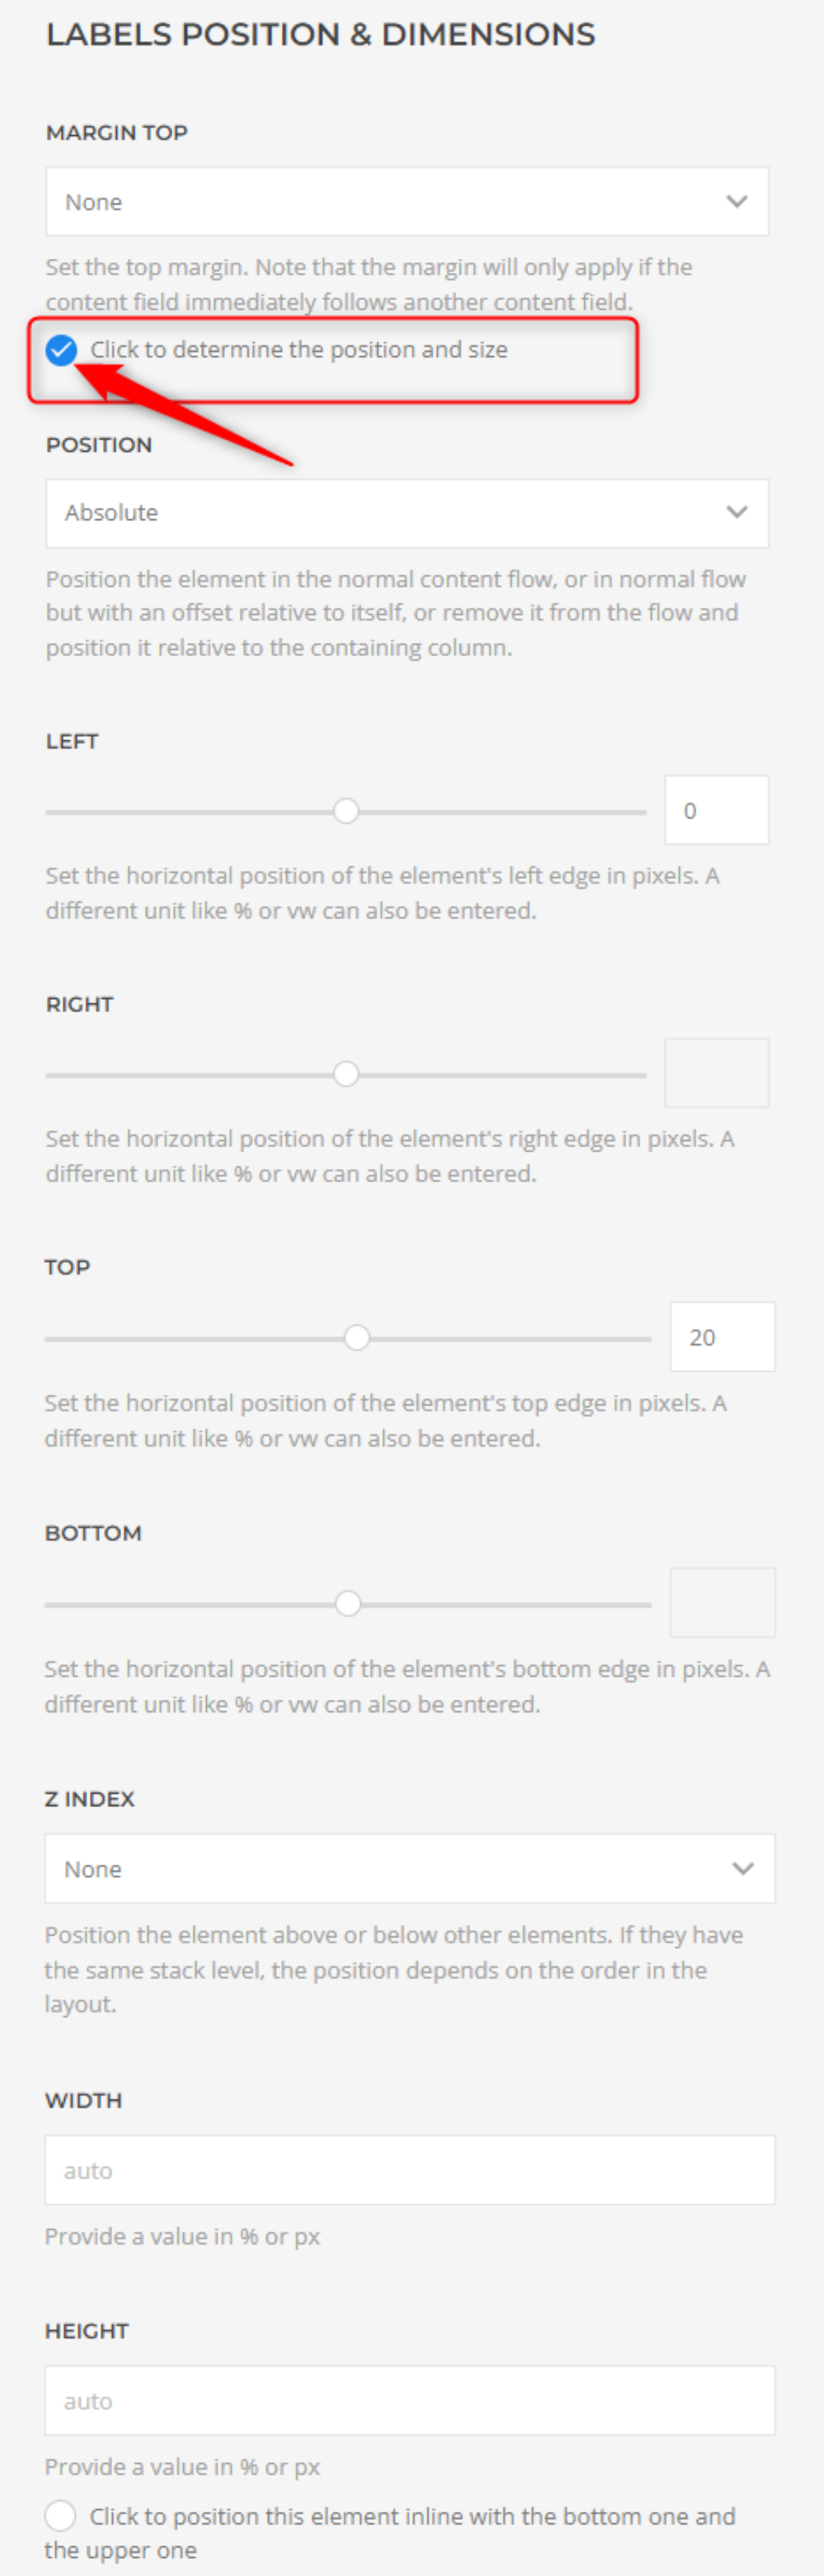 dj-catalog2 integrator with yootheme add extended produts grid element settings labels options